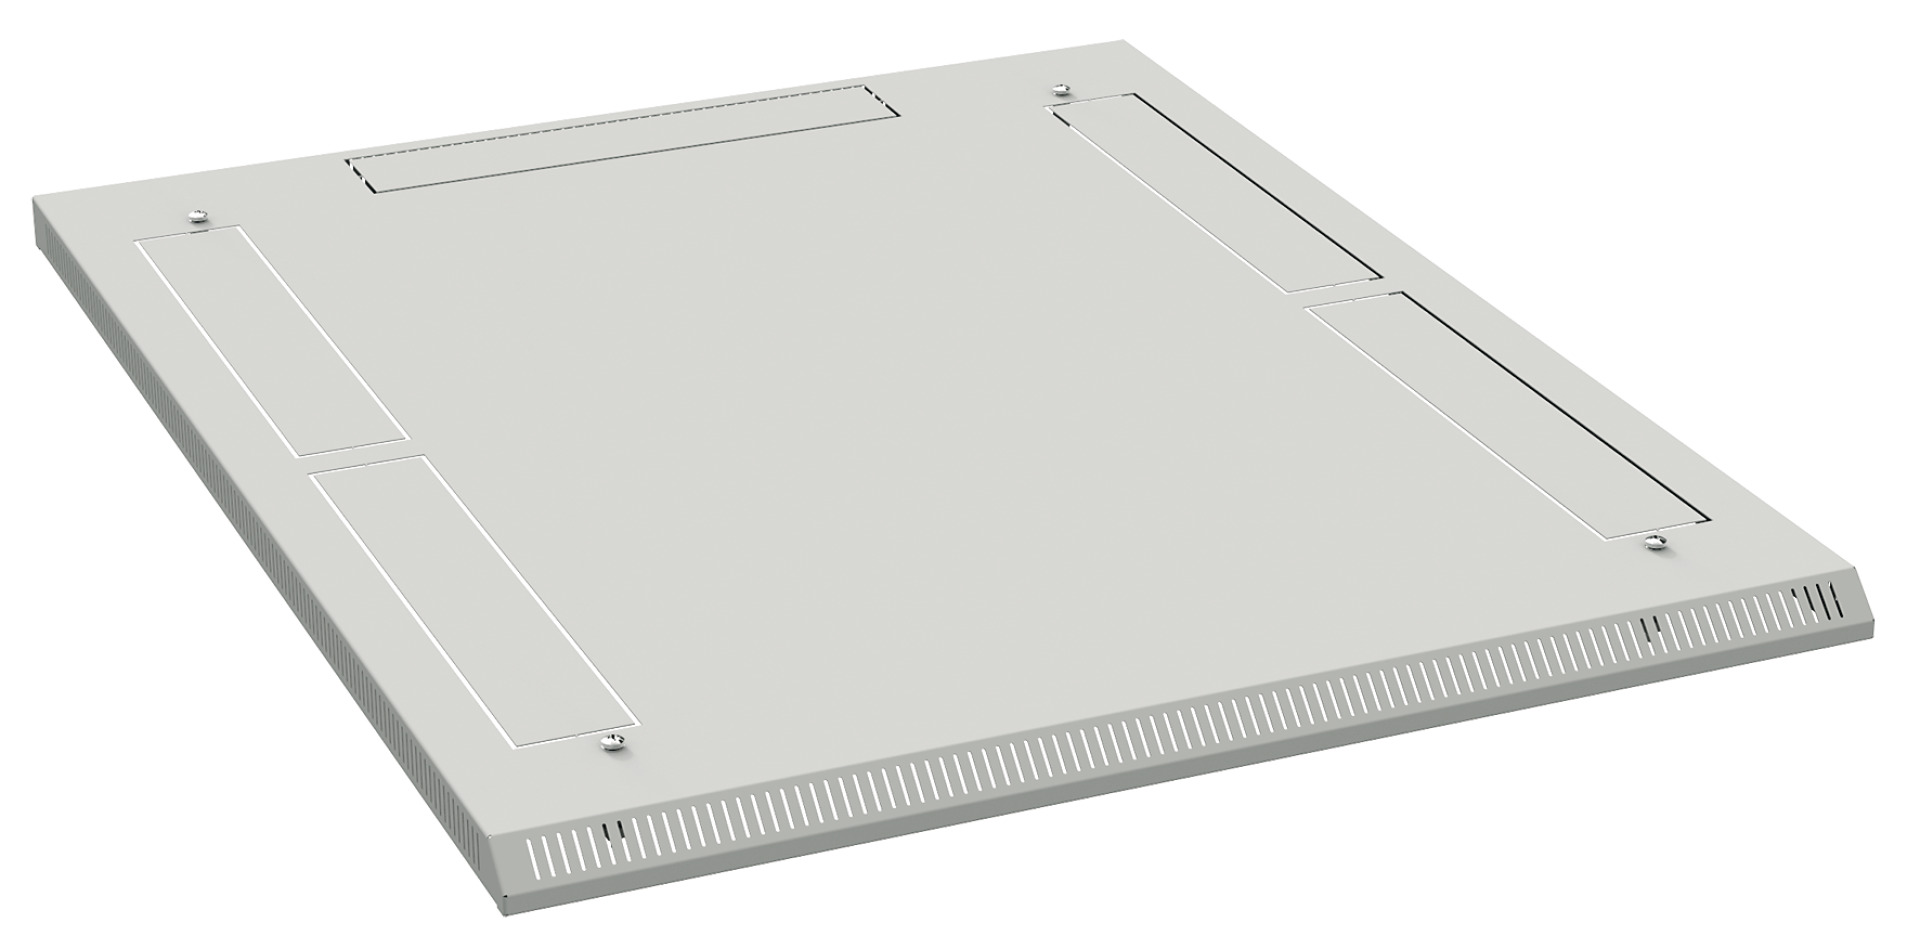 Additional Roof H=40 mm, 800x1000 mm, RAL7035, for Cabinet Series PRO